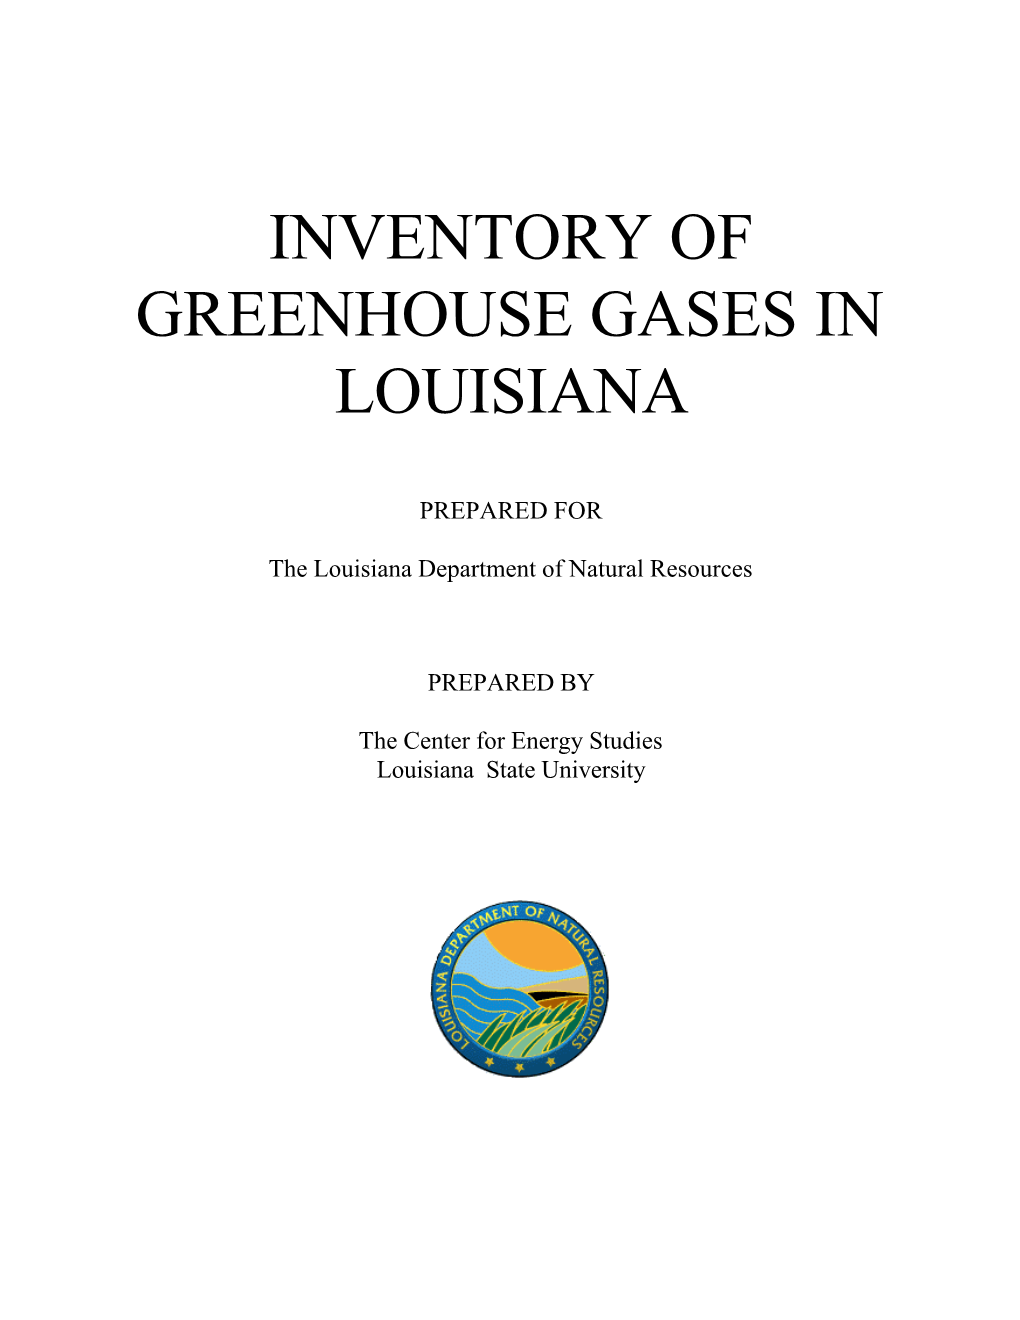 Inventory of Greenhouse Gases in Louisiana